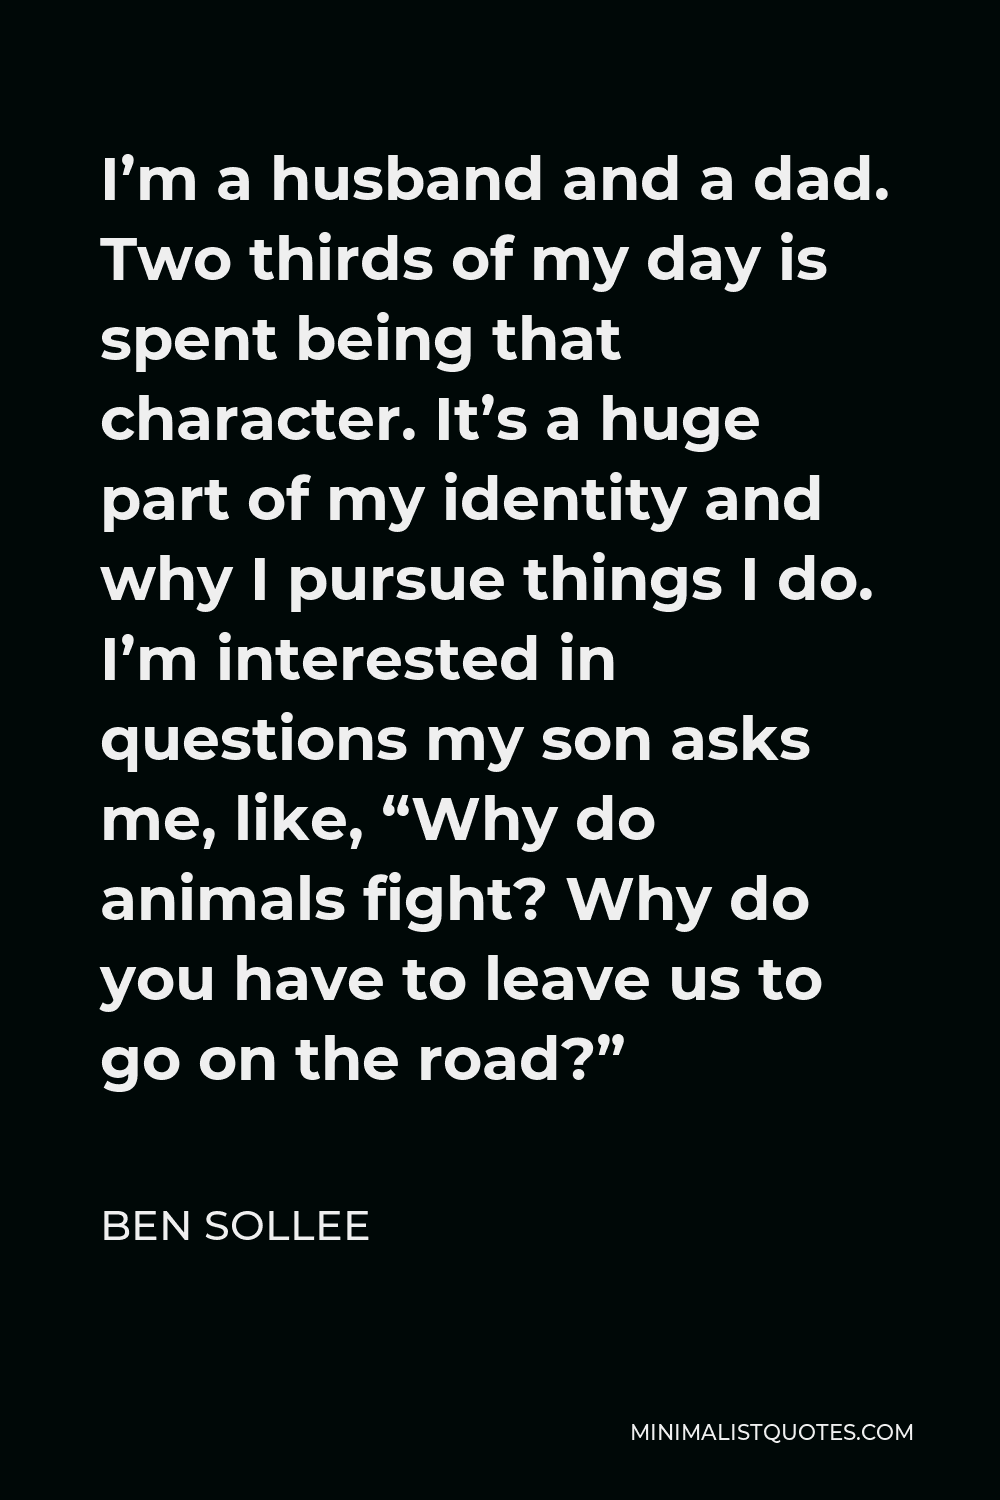 Ben Sollee Quote - I’m a husband and a dad. Two thirds of my day is spent being that character. It’s a huge part of my identity and why I pursue things I do. I’m interested in questions my son asks me, like, “Why do animals fight? Why do you have to leave us to go on the road?”